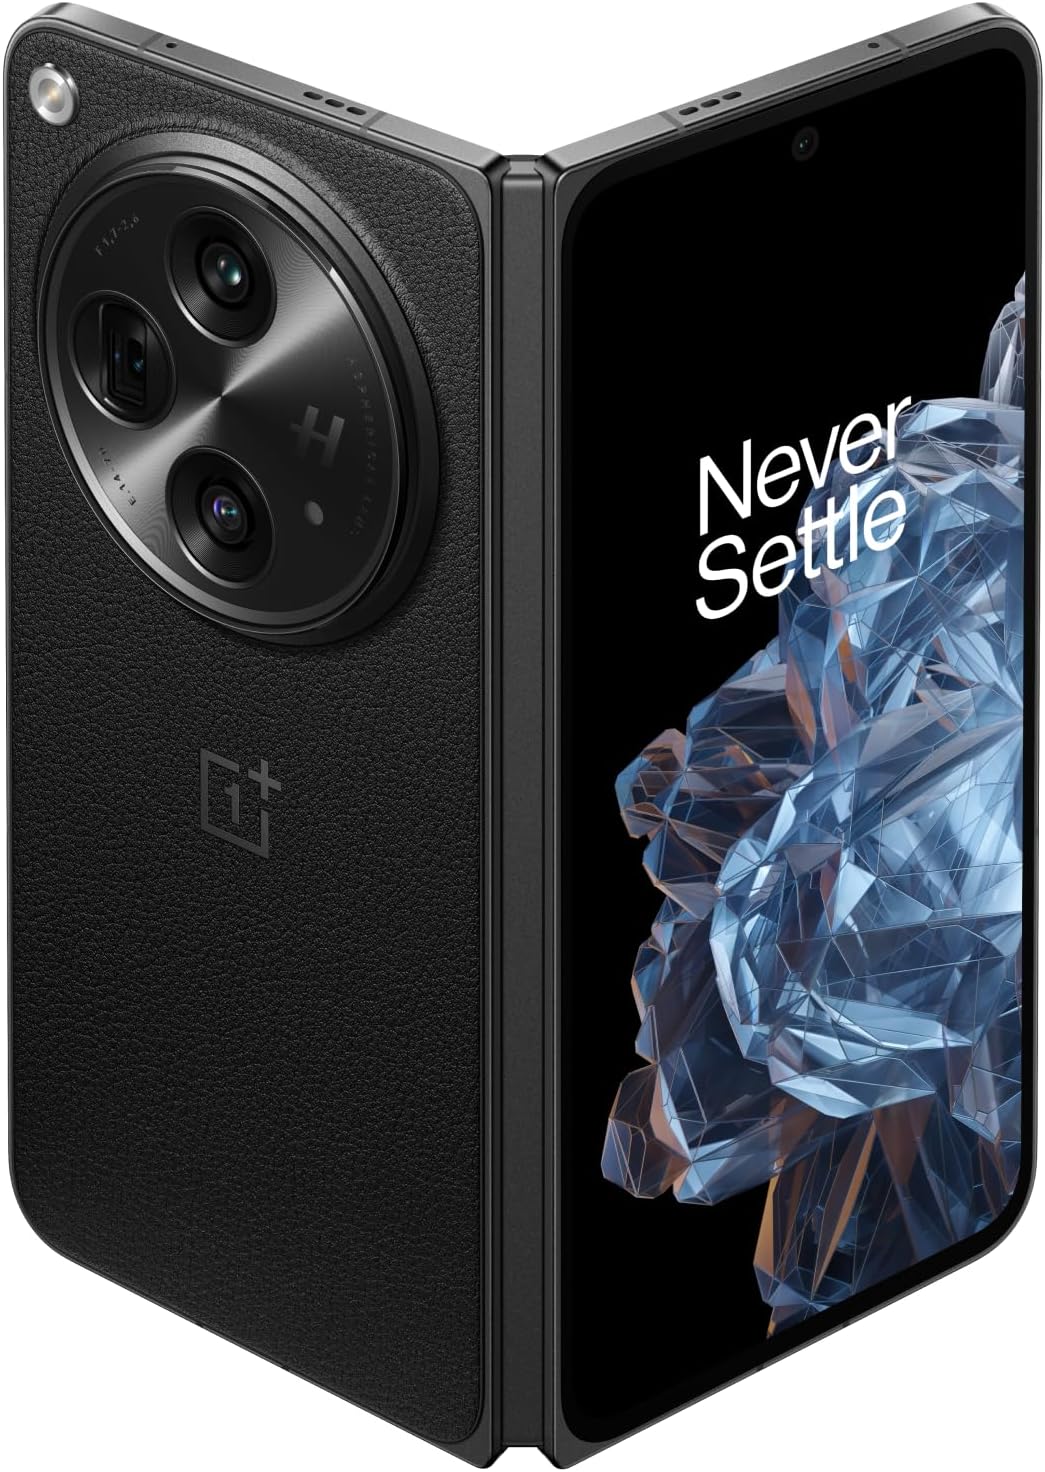 OnePlus Open, 16GB RAM+512GB, Dual-SIM, Voyager Black, Android Smartphone, 4805 mAh Battery, 67W Fast Charging, Hasselblad Camera, 120Hz Fluid Display